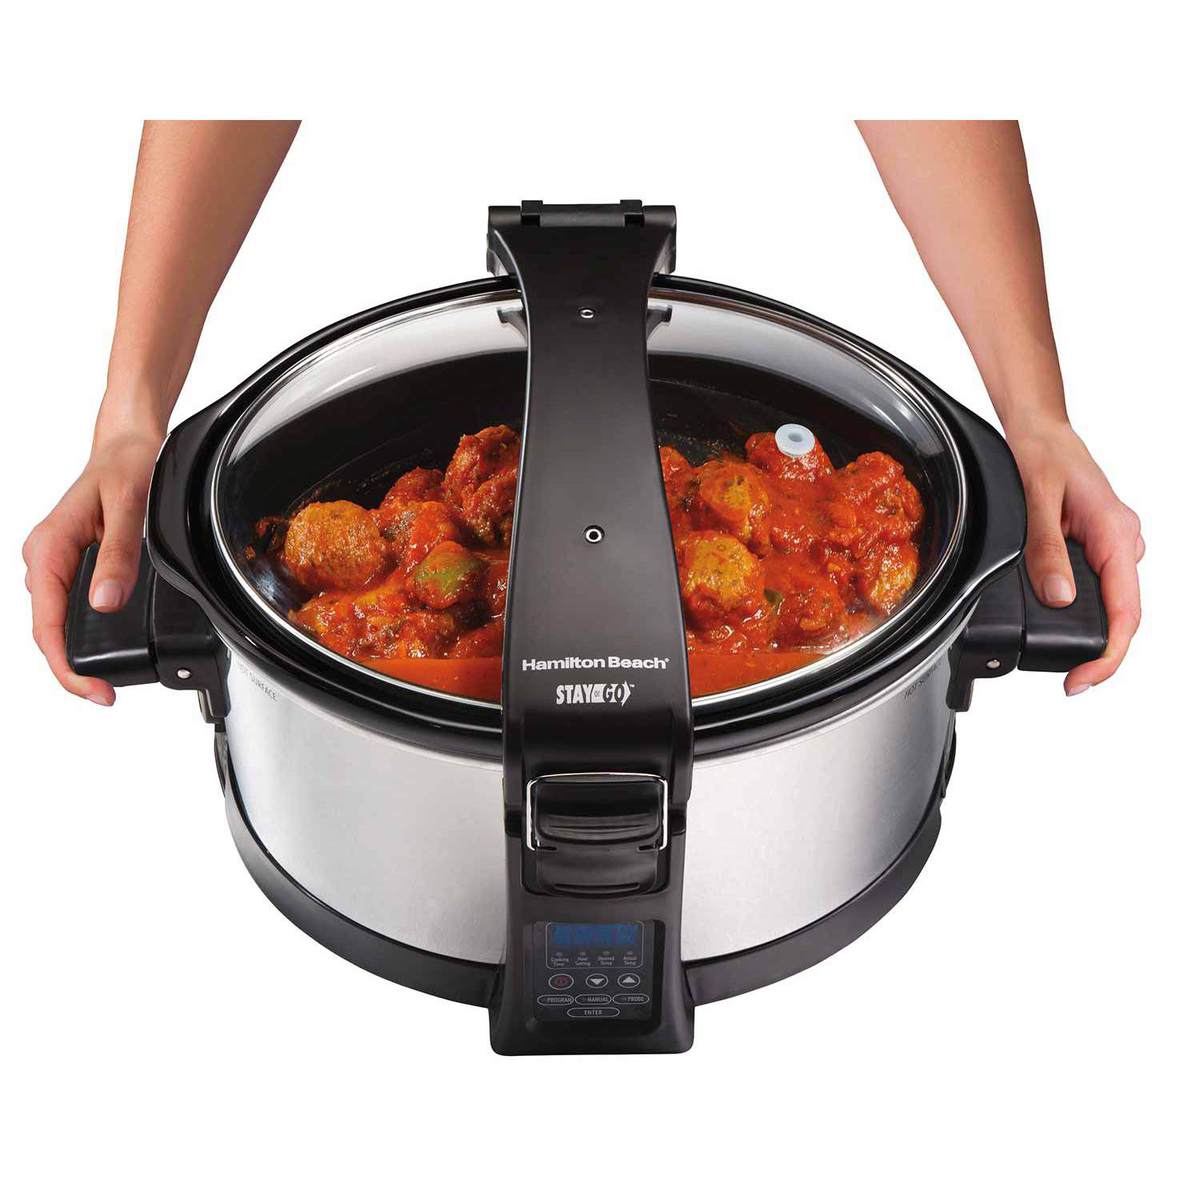 If you do need to move your slow cooker, be sure to use the attached handles.